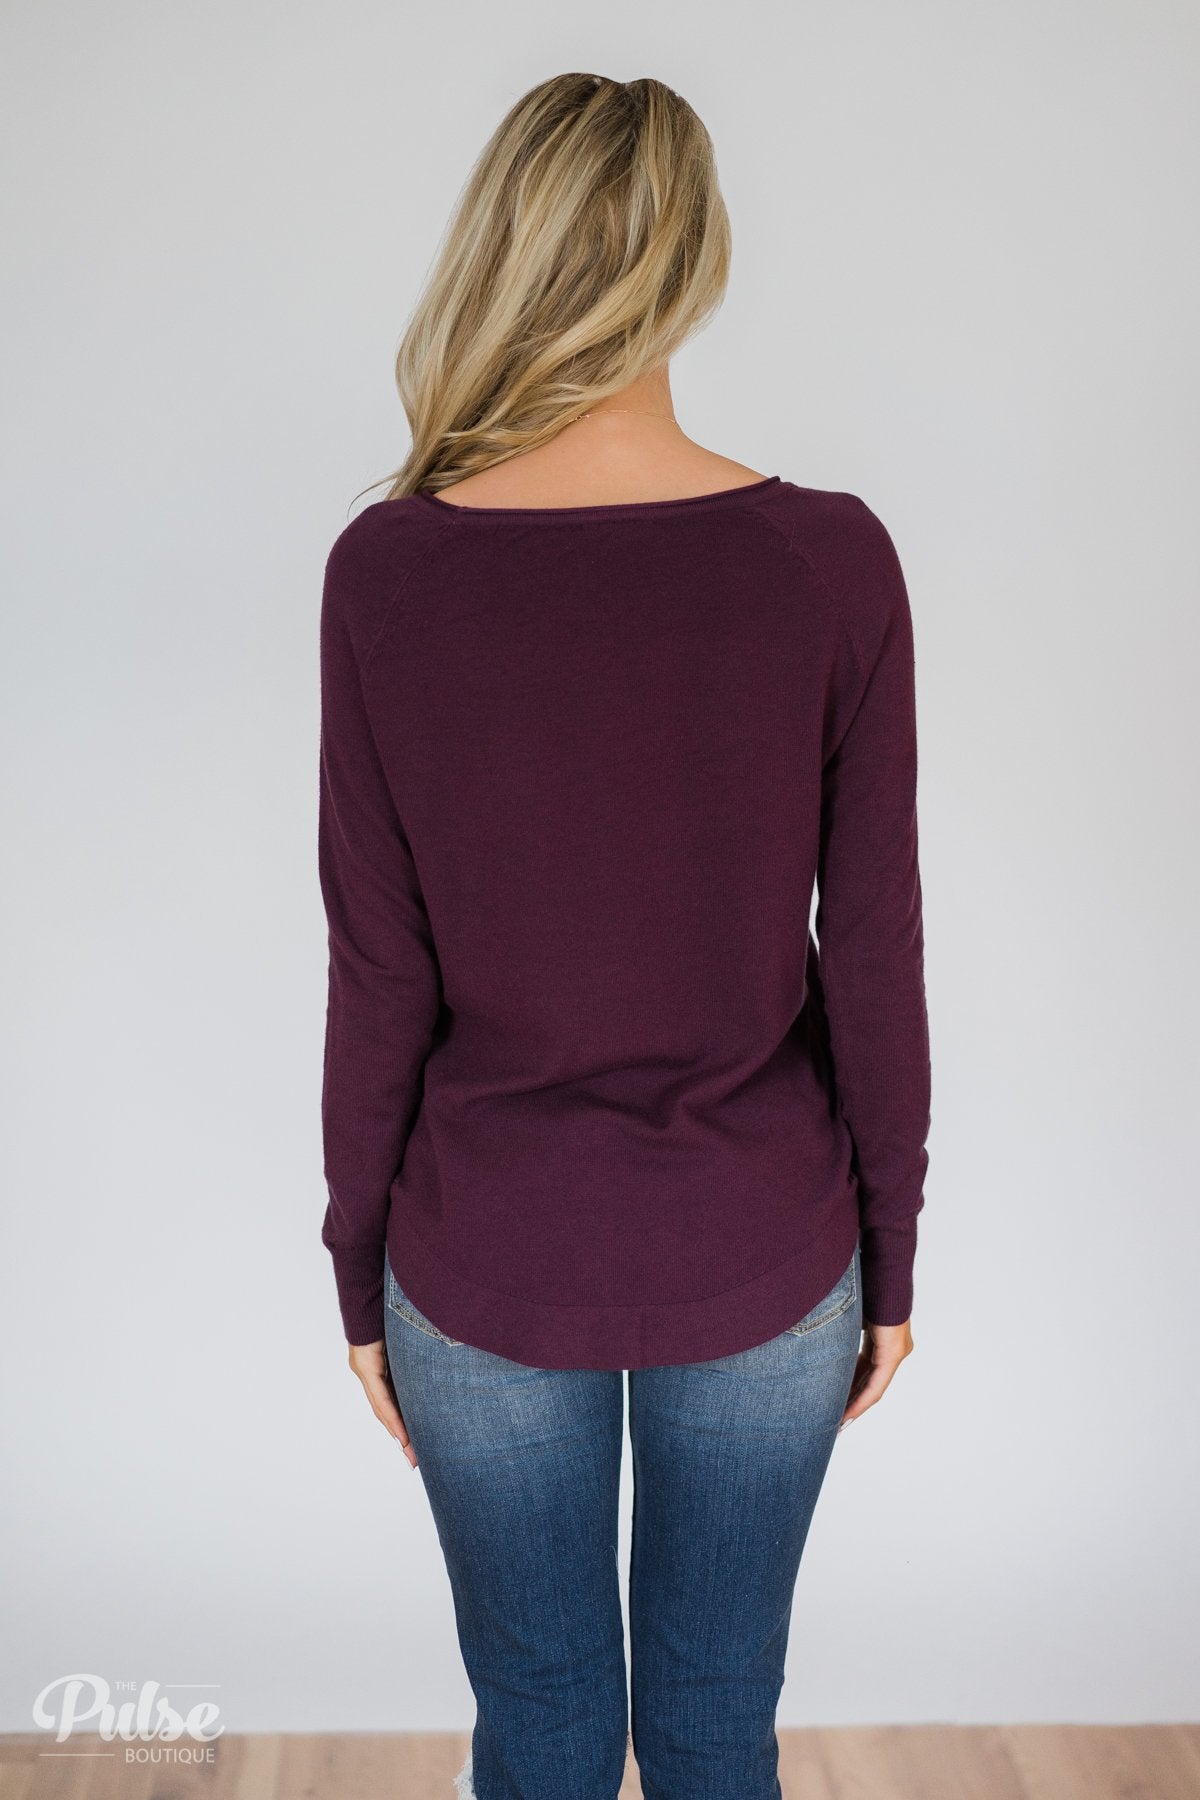 Butter Me Up Sweater- Eggplant